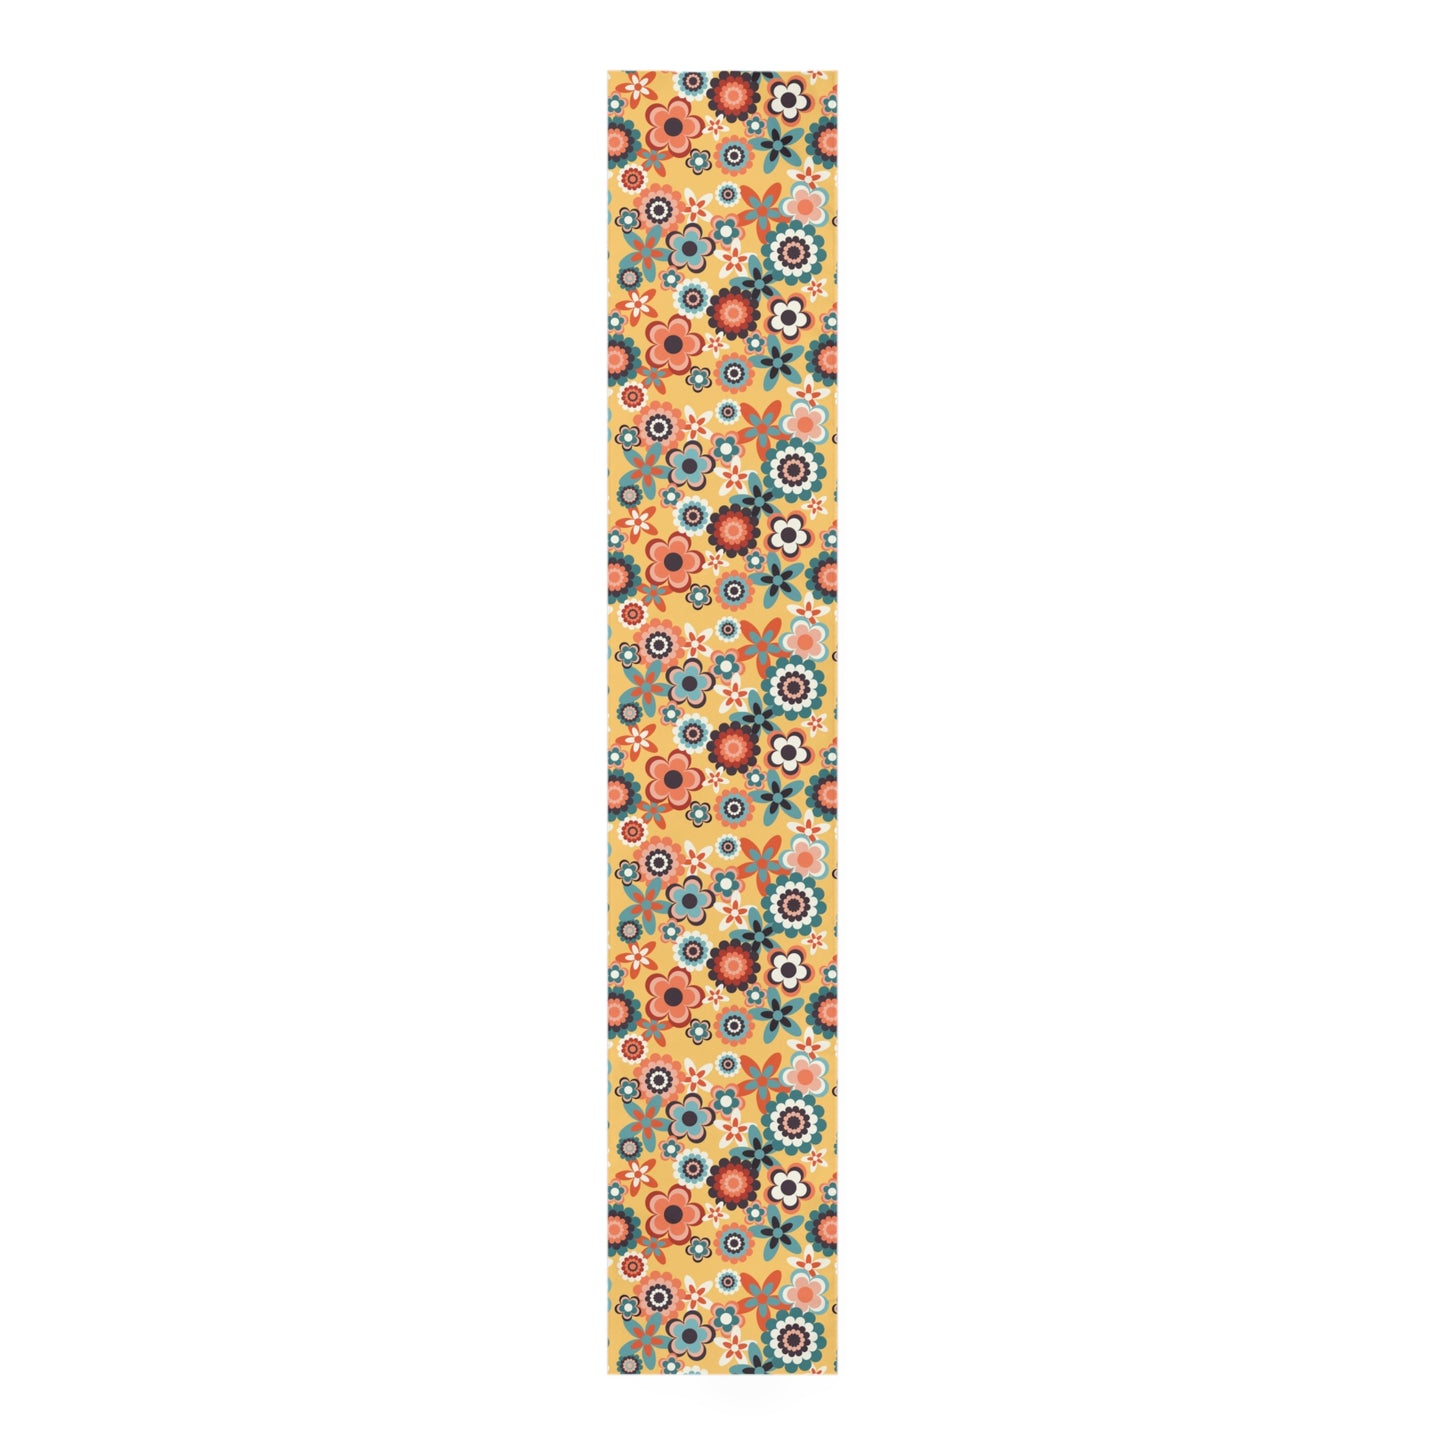 Retro 60s 70s Groovy Flowers Boho Mid Century Mod Yellow, Coral & Blue Table Runner